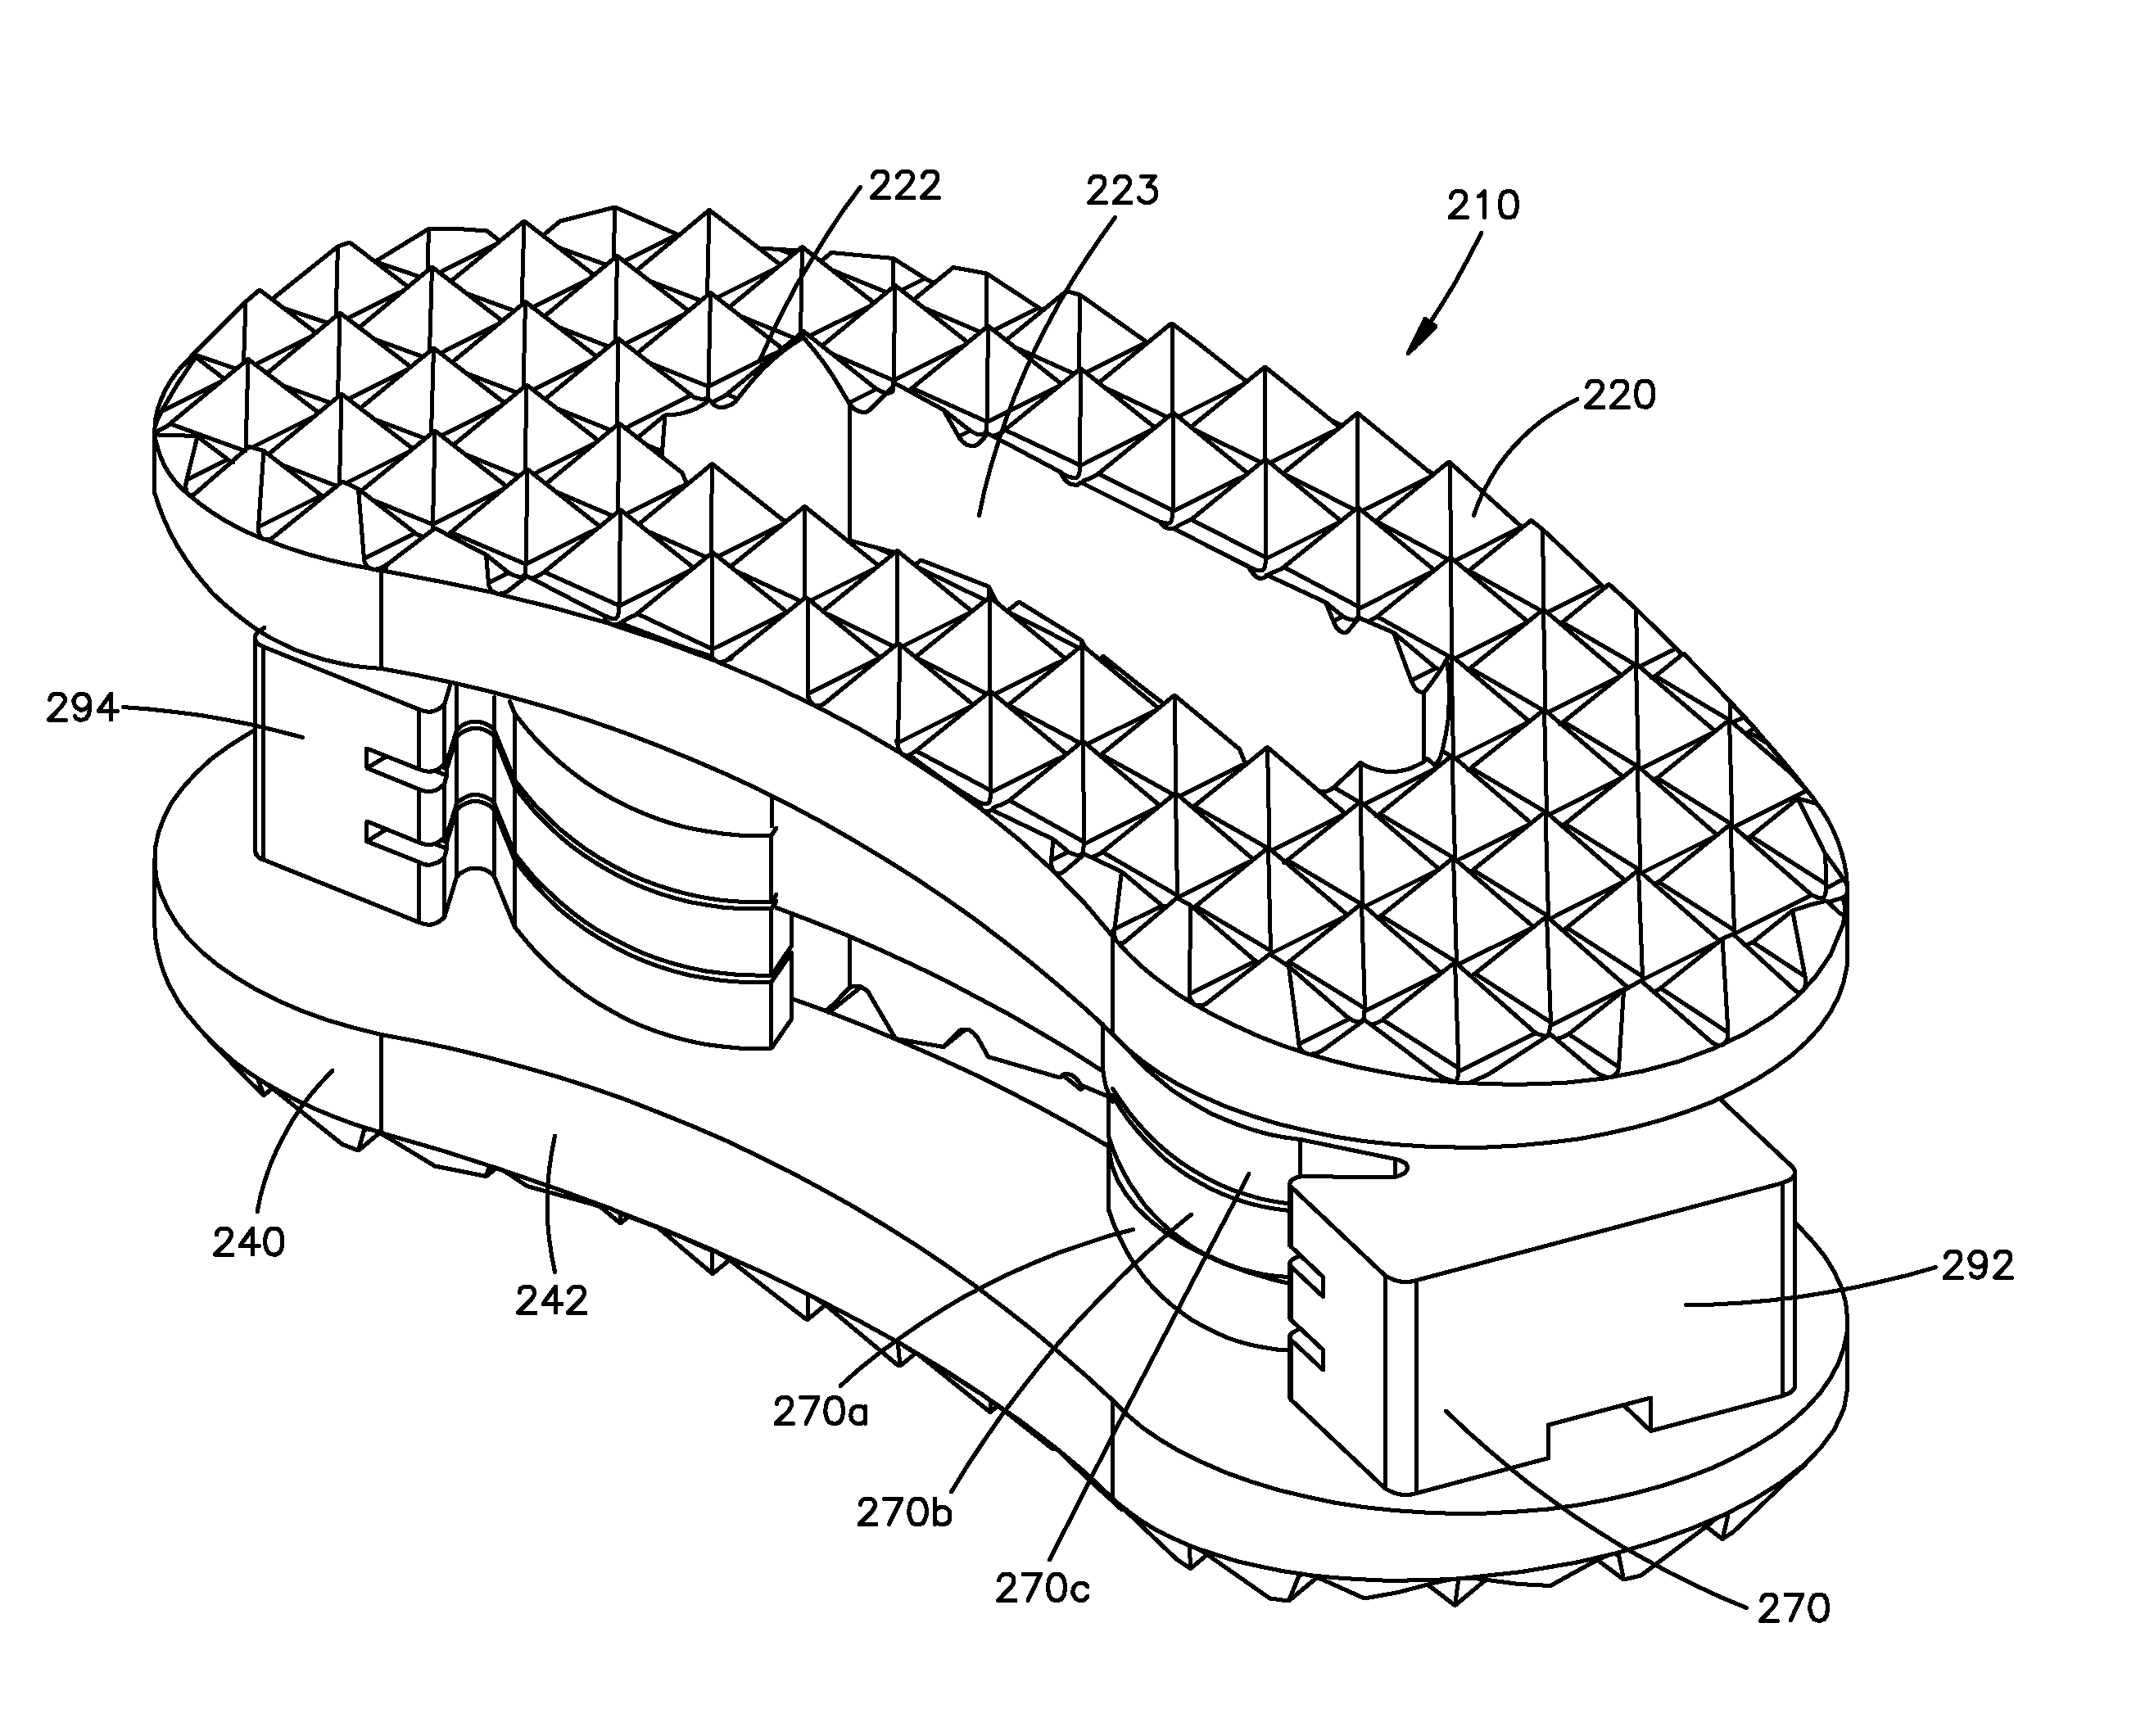 Expandable interbody spacer device